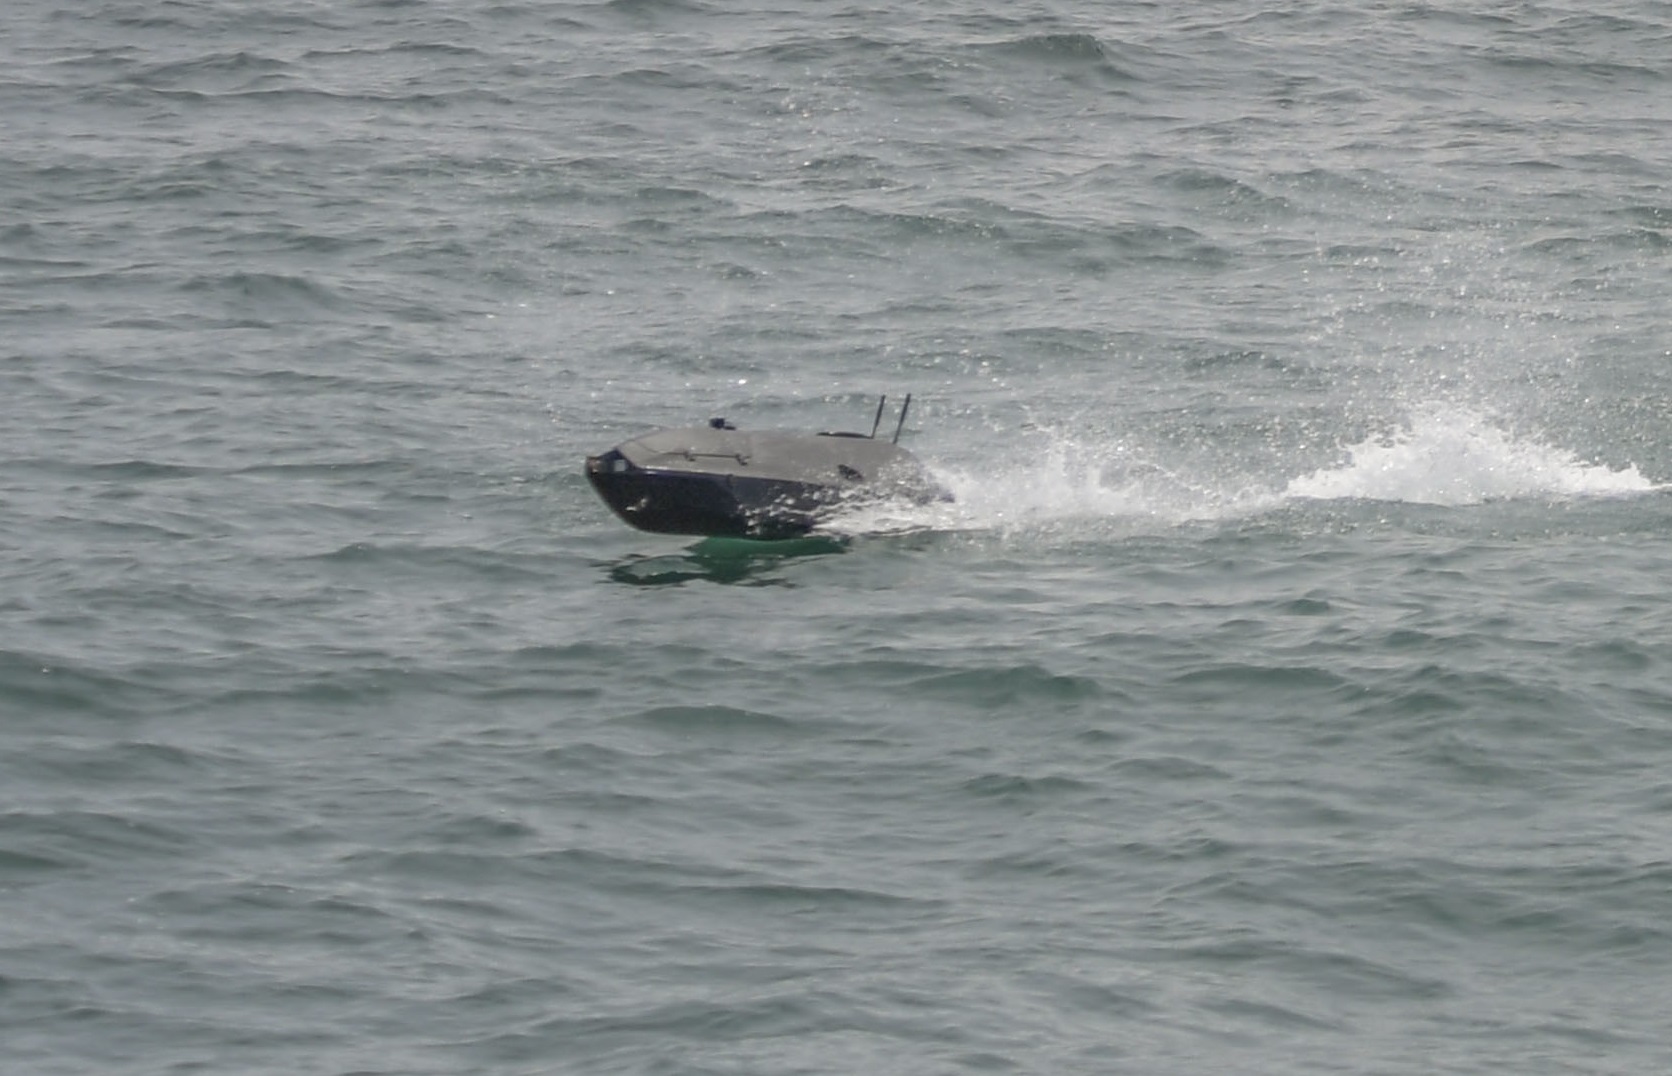 Us Navy Showcases New Type Of Unmanned Surface Vessel